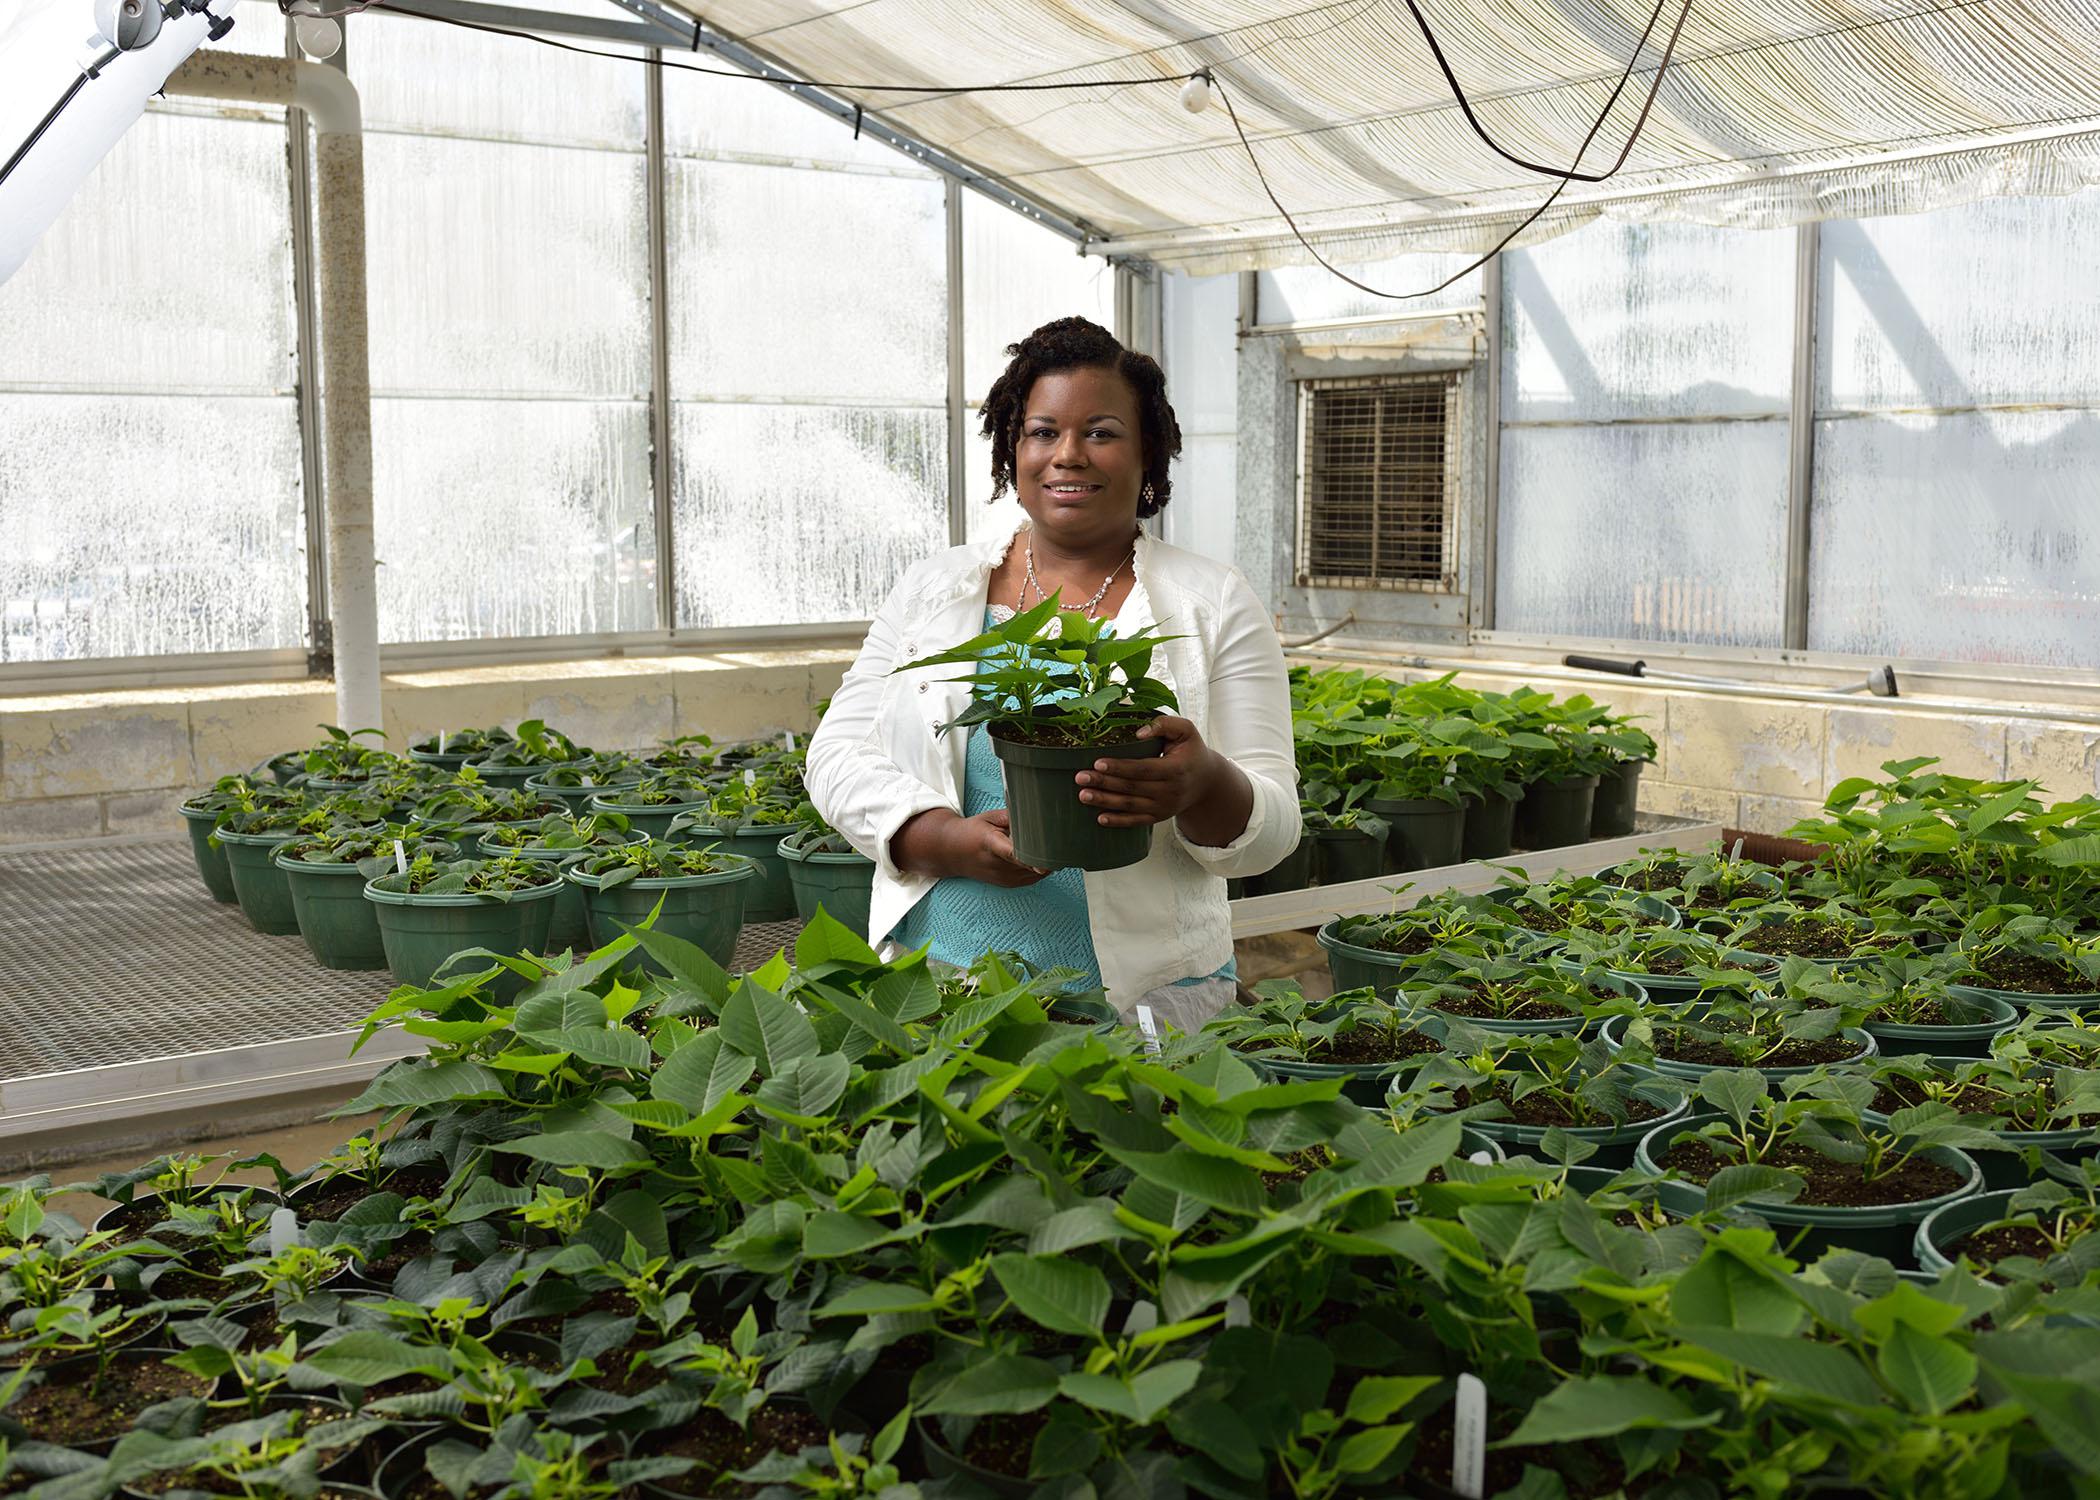 Sanitra Lawrence, a senior from Starkville majoring in horticulture at Mississippi State University, inspects poinsettias for whiteflies at a greenhouse. (Photo by MSU Ag Communications/Kevin Hudson)